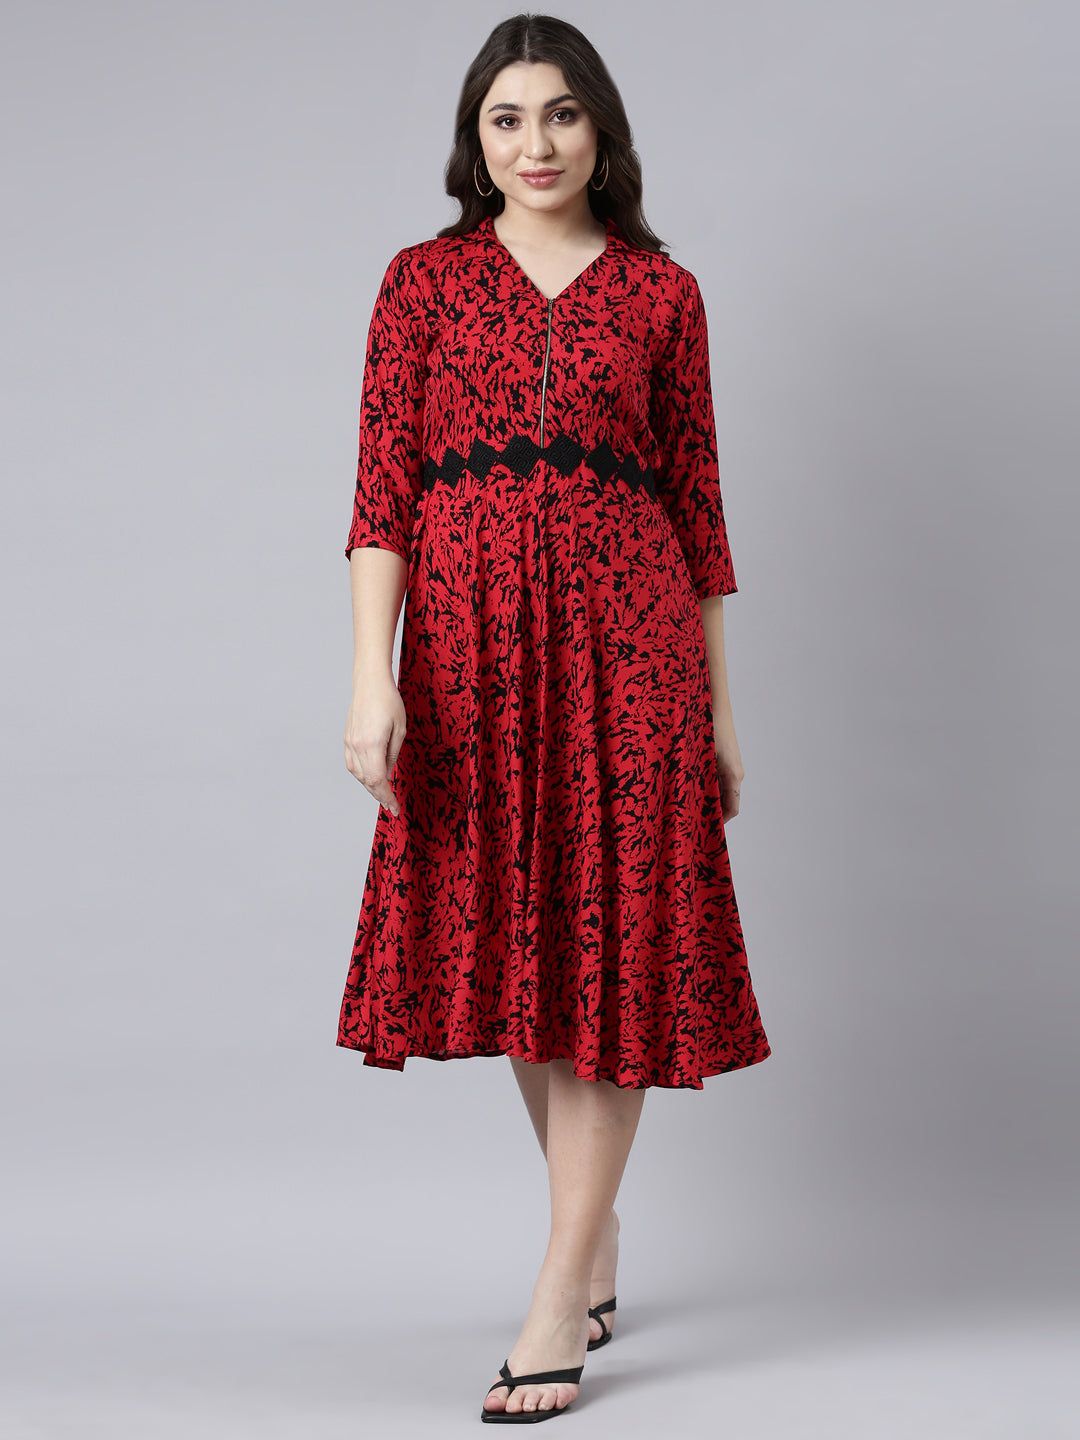 Neerus Red Straight Casual Floral Maxi Dresses